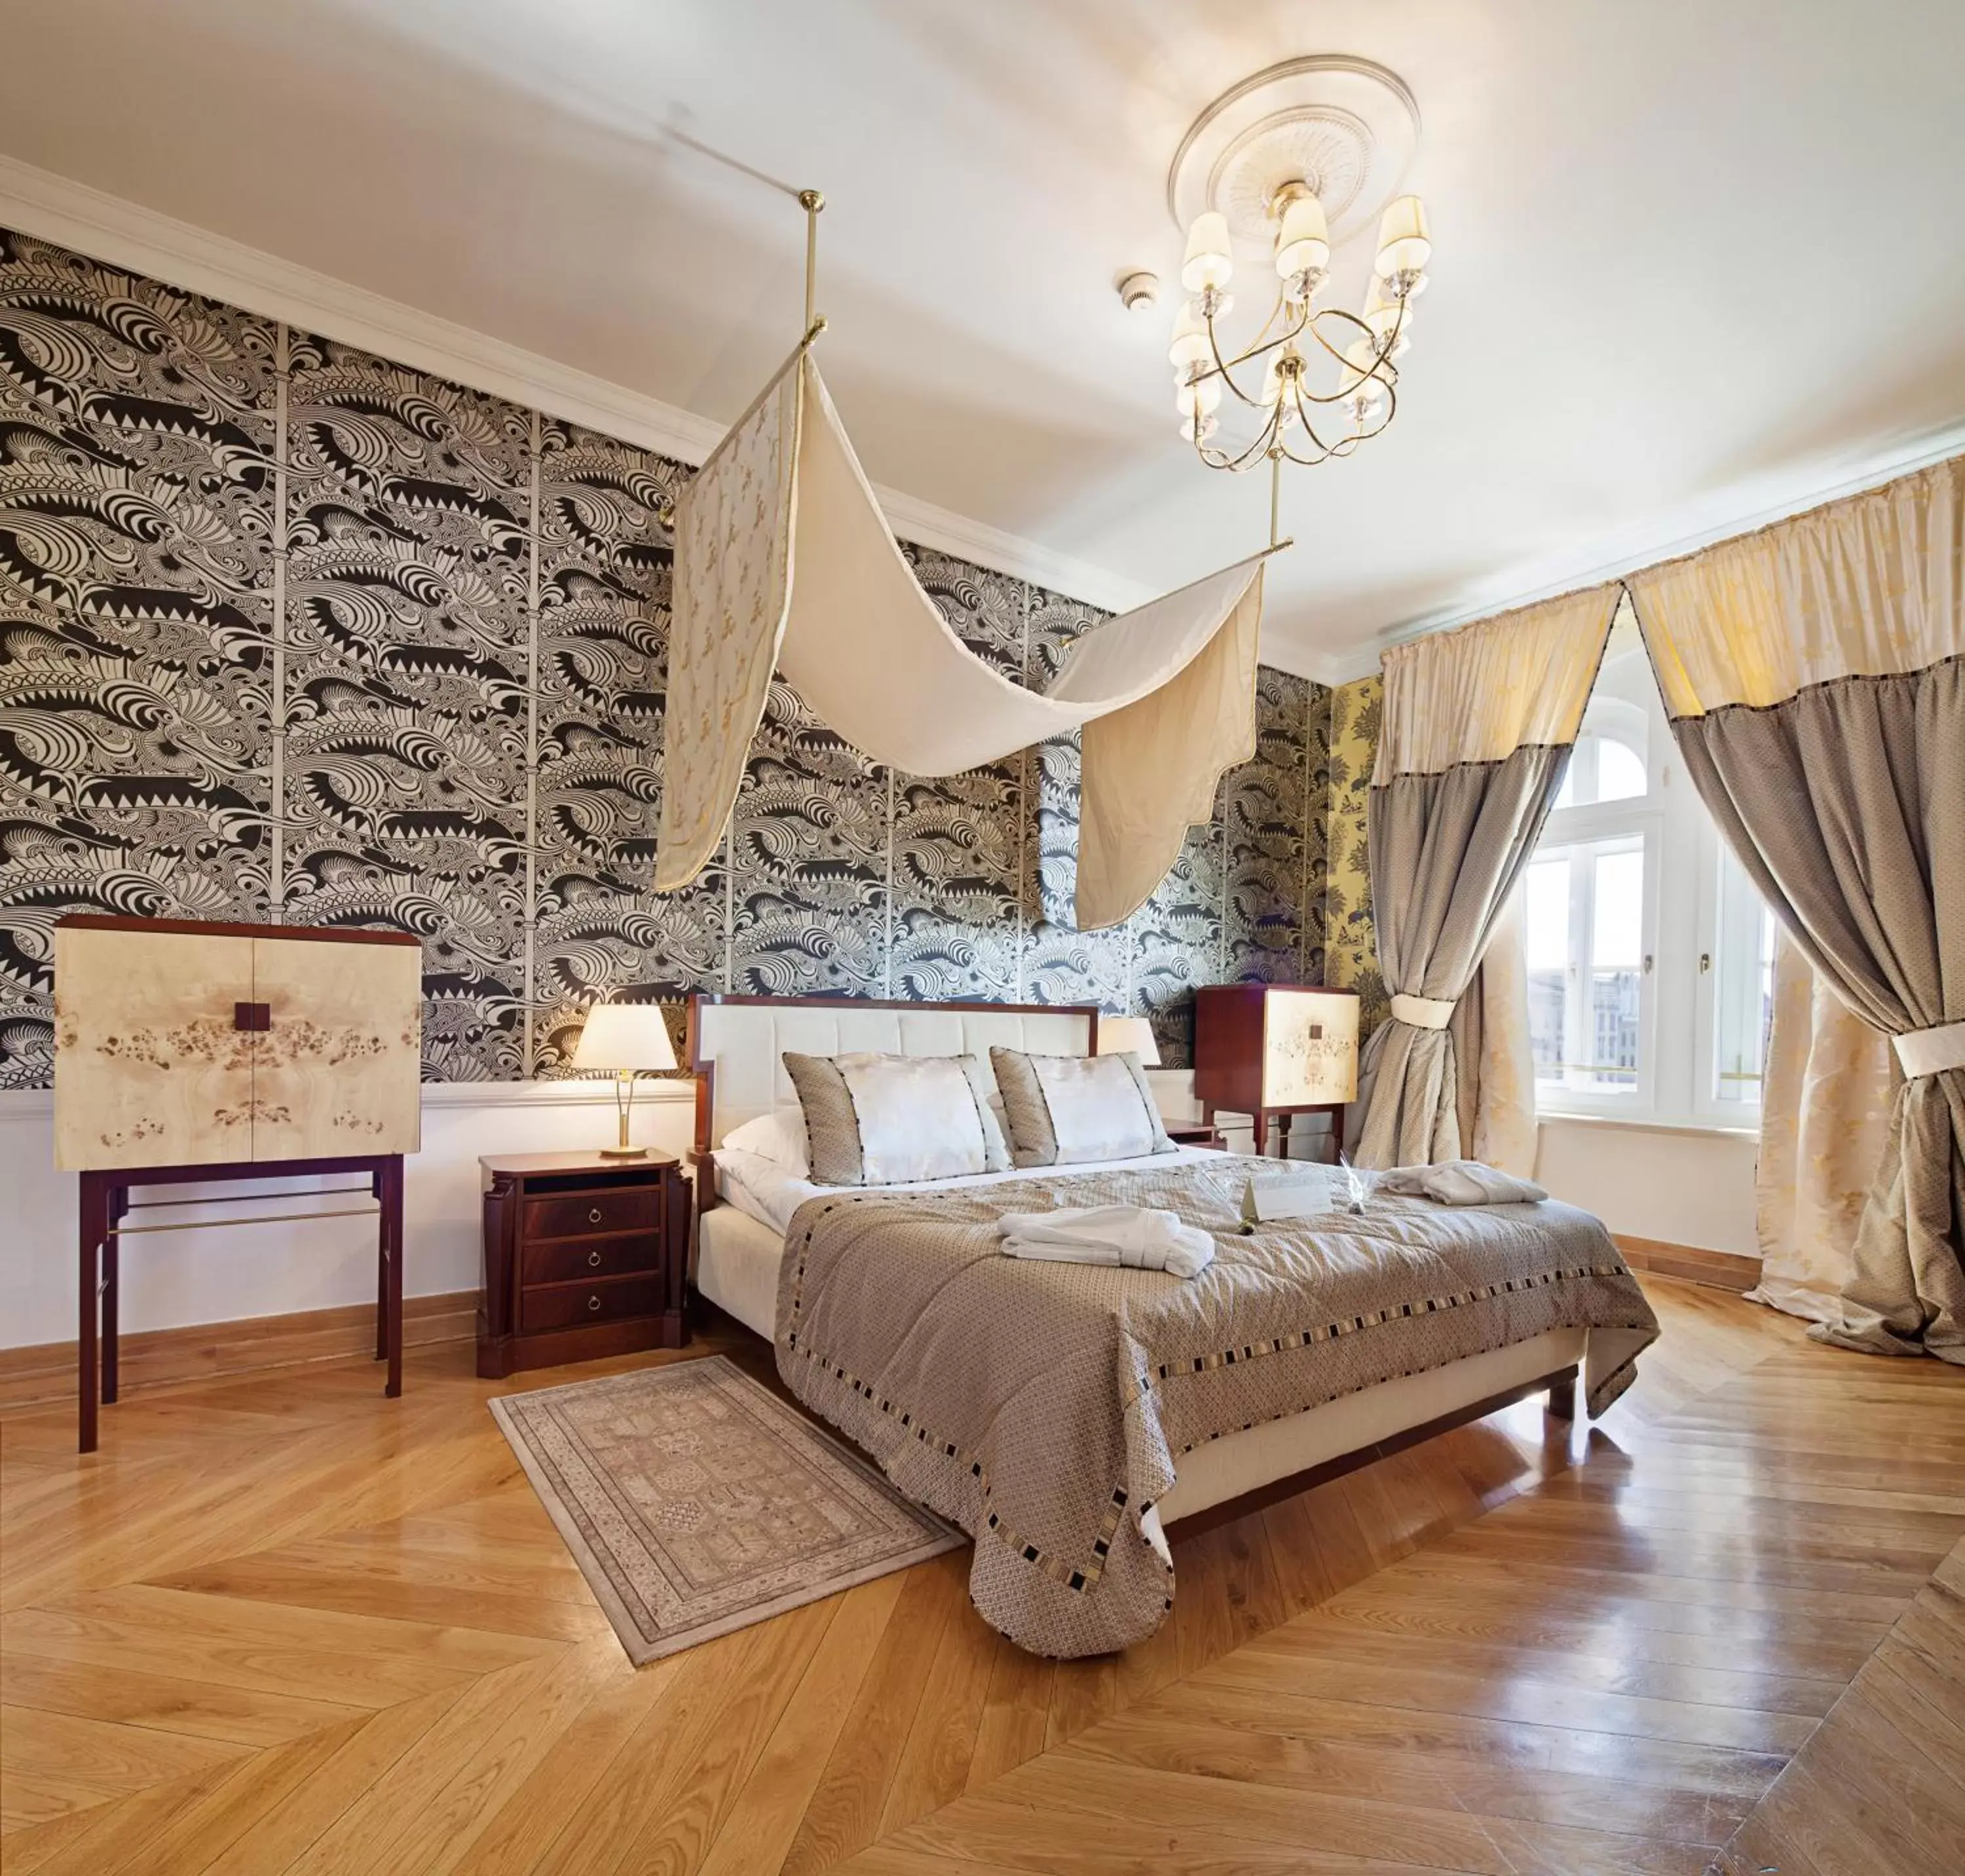 Bed in The Bonerowski Palace